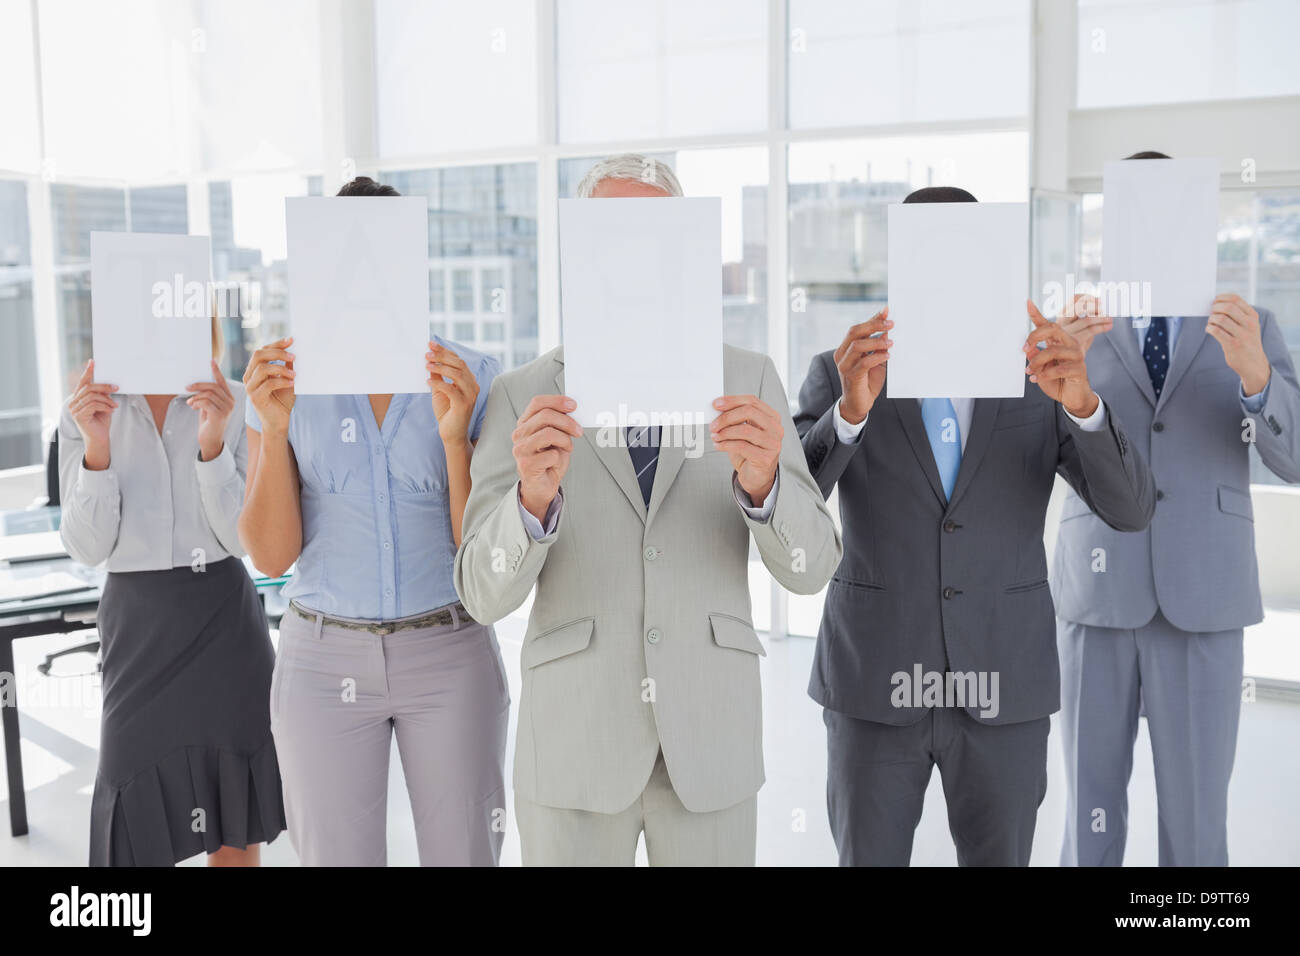 Buisness team holding up blank pages and covering their faces Stock Photo